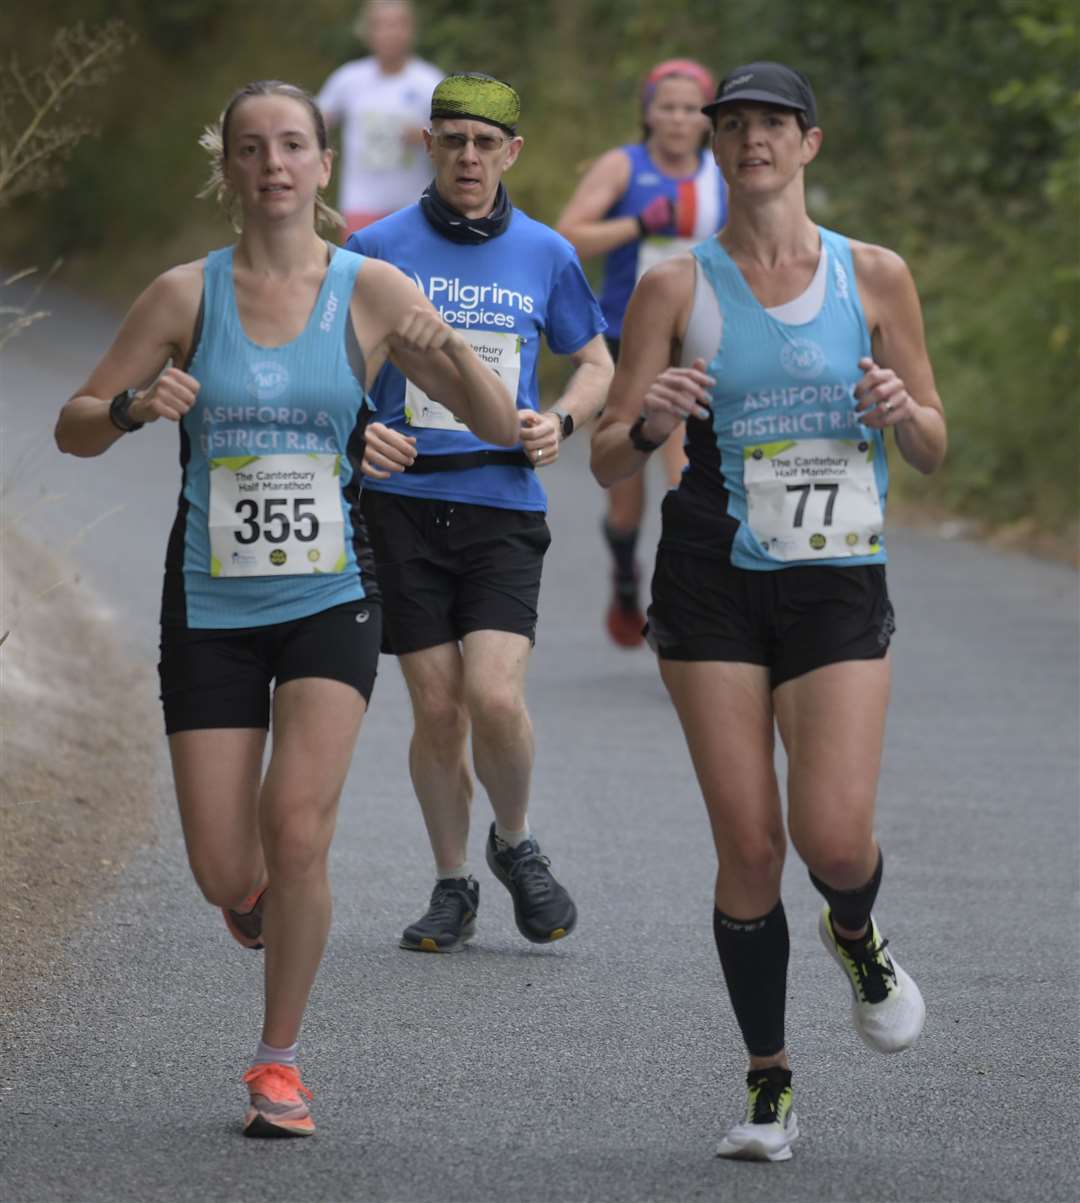 Ashford & District Road Running Club duo Alice Cook (No.355) and Ailis Goddard (No.77). Picture: Barry Goodwin (58958308)